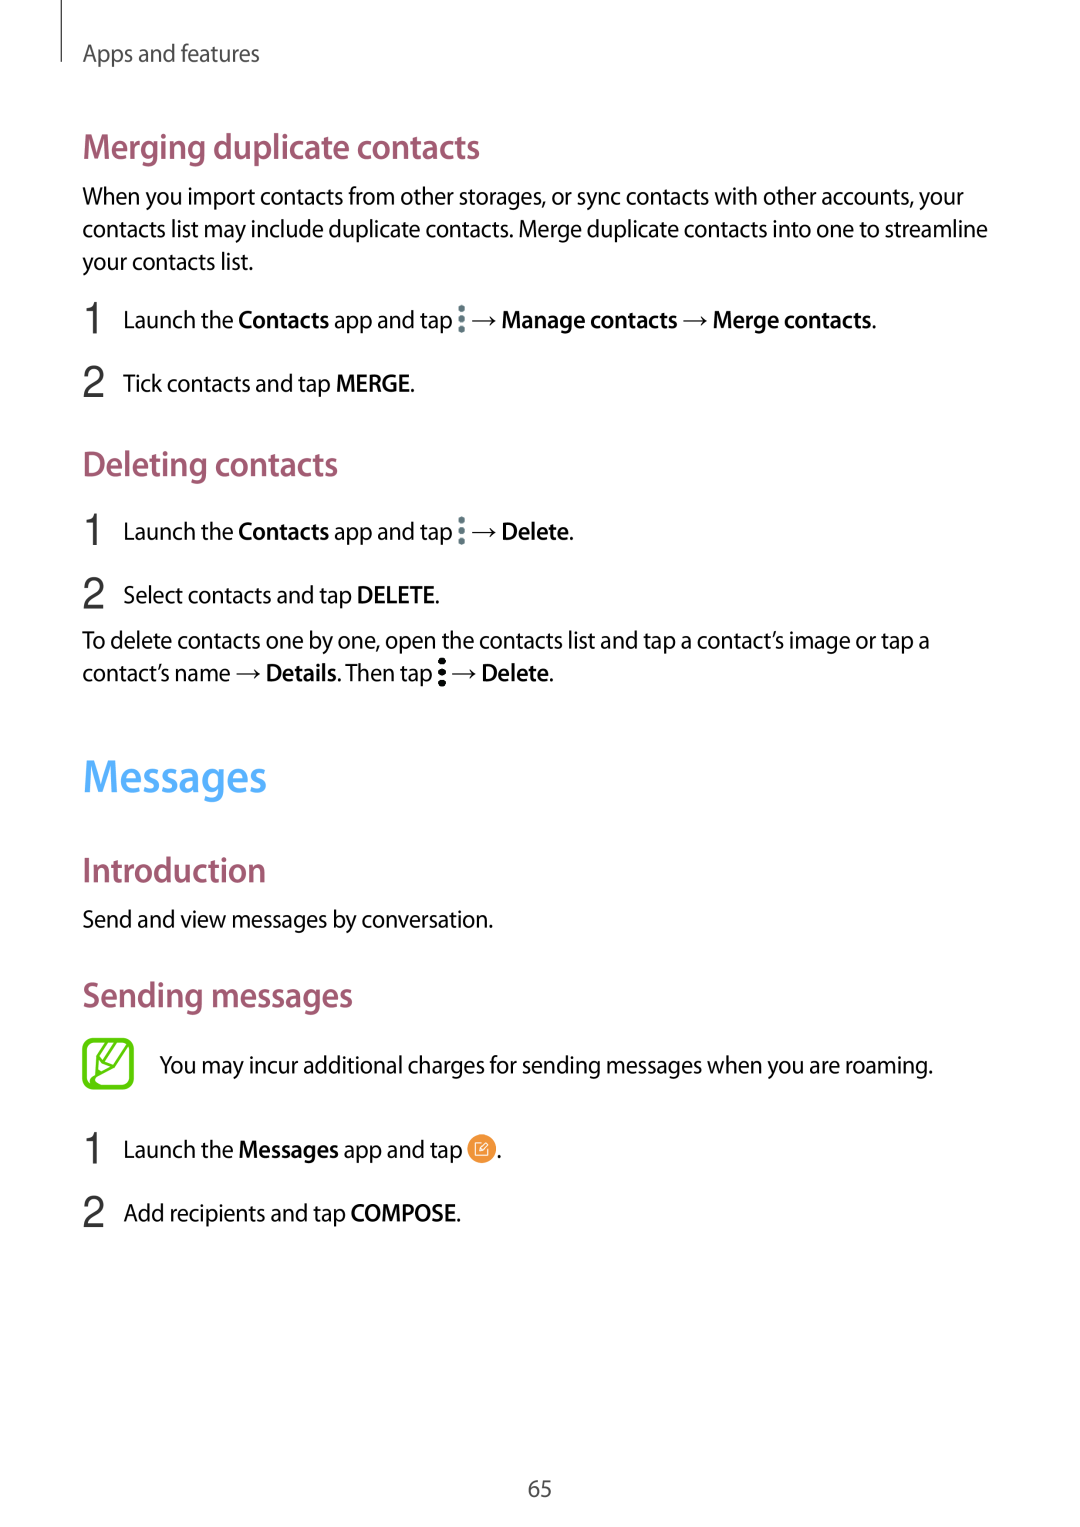 Samsung SM-A520FZBAETL manual Messages, Merging duplicate contacts, Deleting contacts, Sending messages, Introduction 